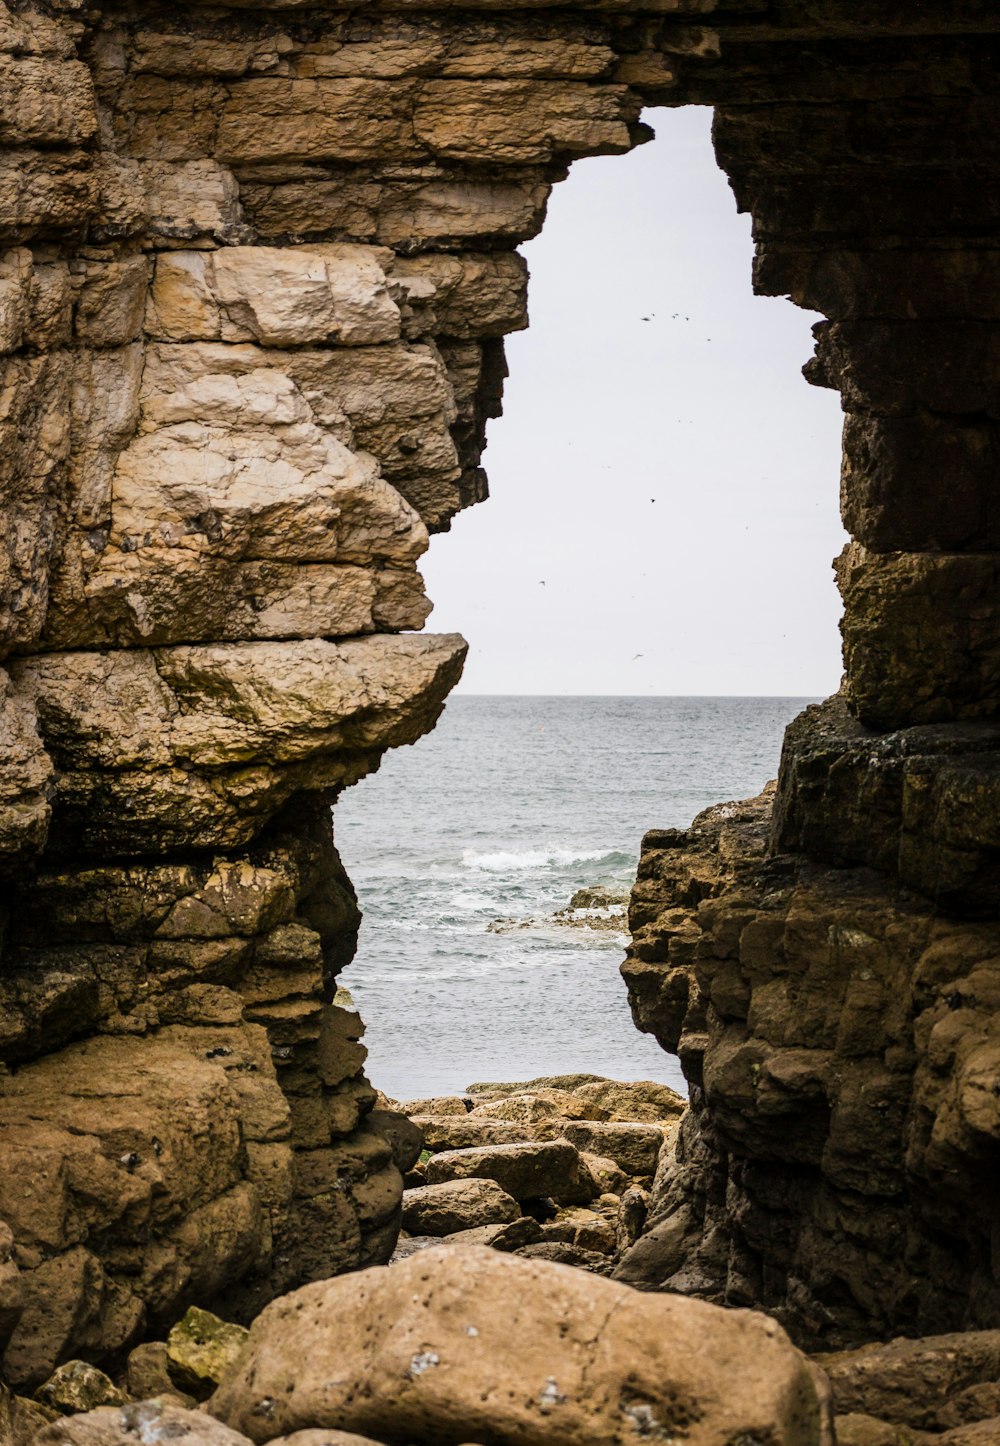 a view of the ocean through a window in a rock wall